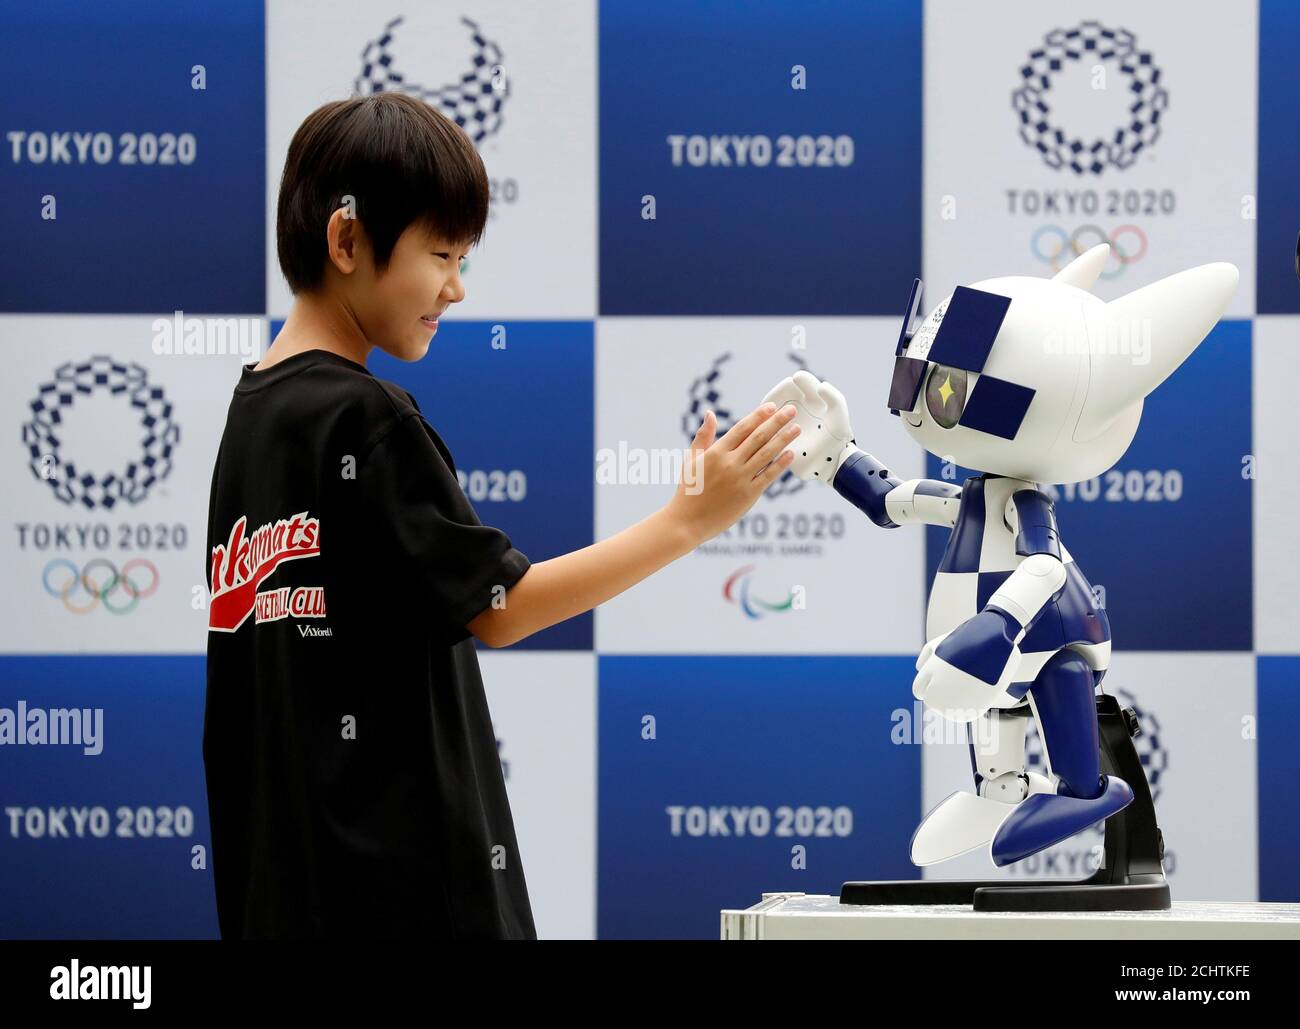 Tokyo 2020 mascot robot Miraitowa, which will be used to support the Tokyo  2020 Olympic and Paralympic Games, exchanges high-five with a boy during  the robot unveiling event to celebrate the first